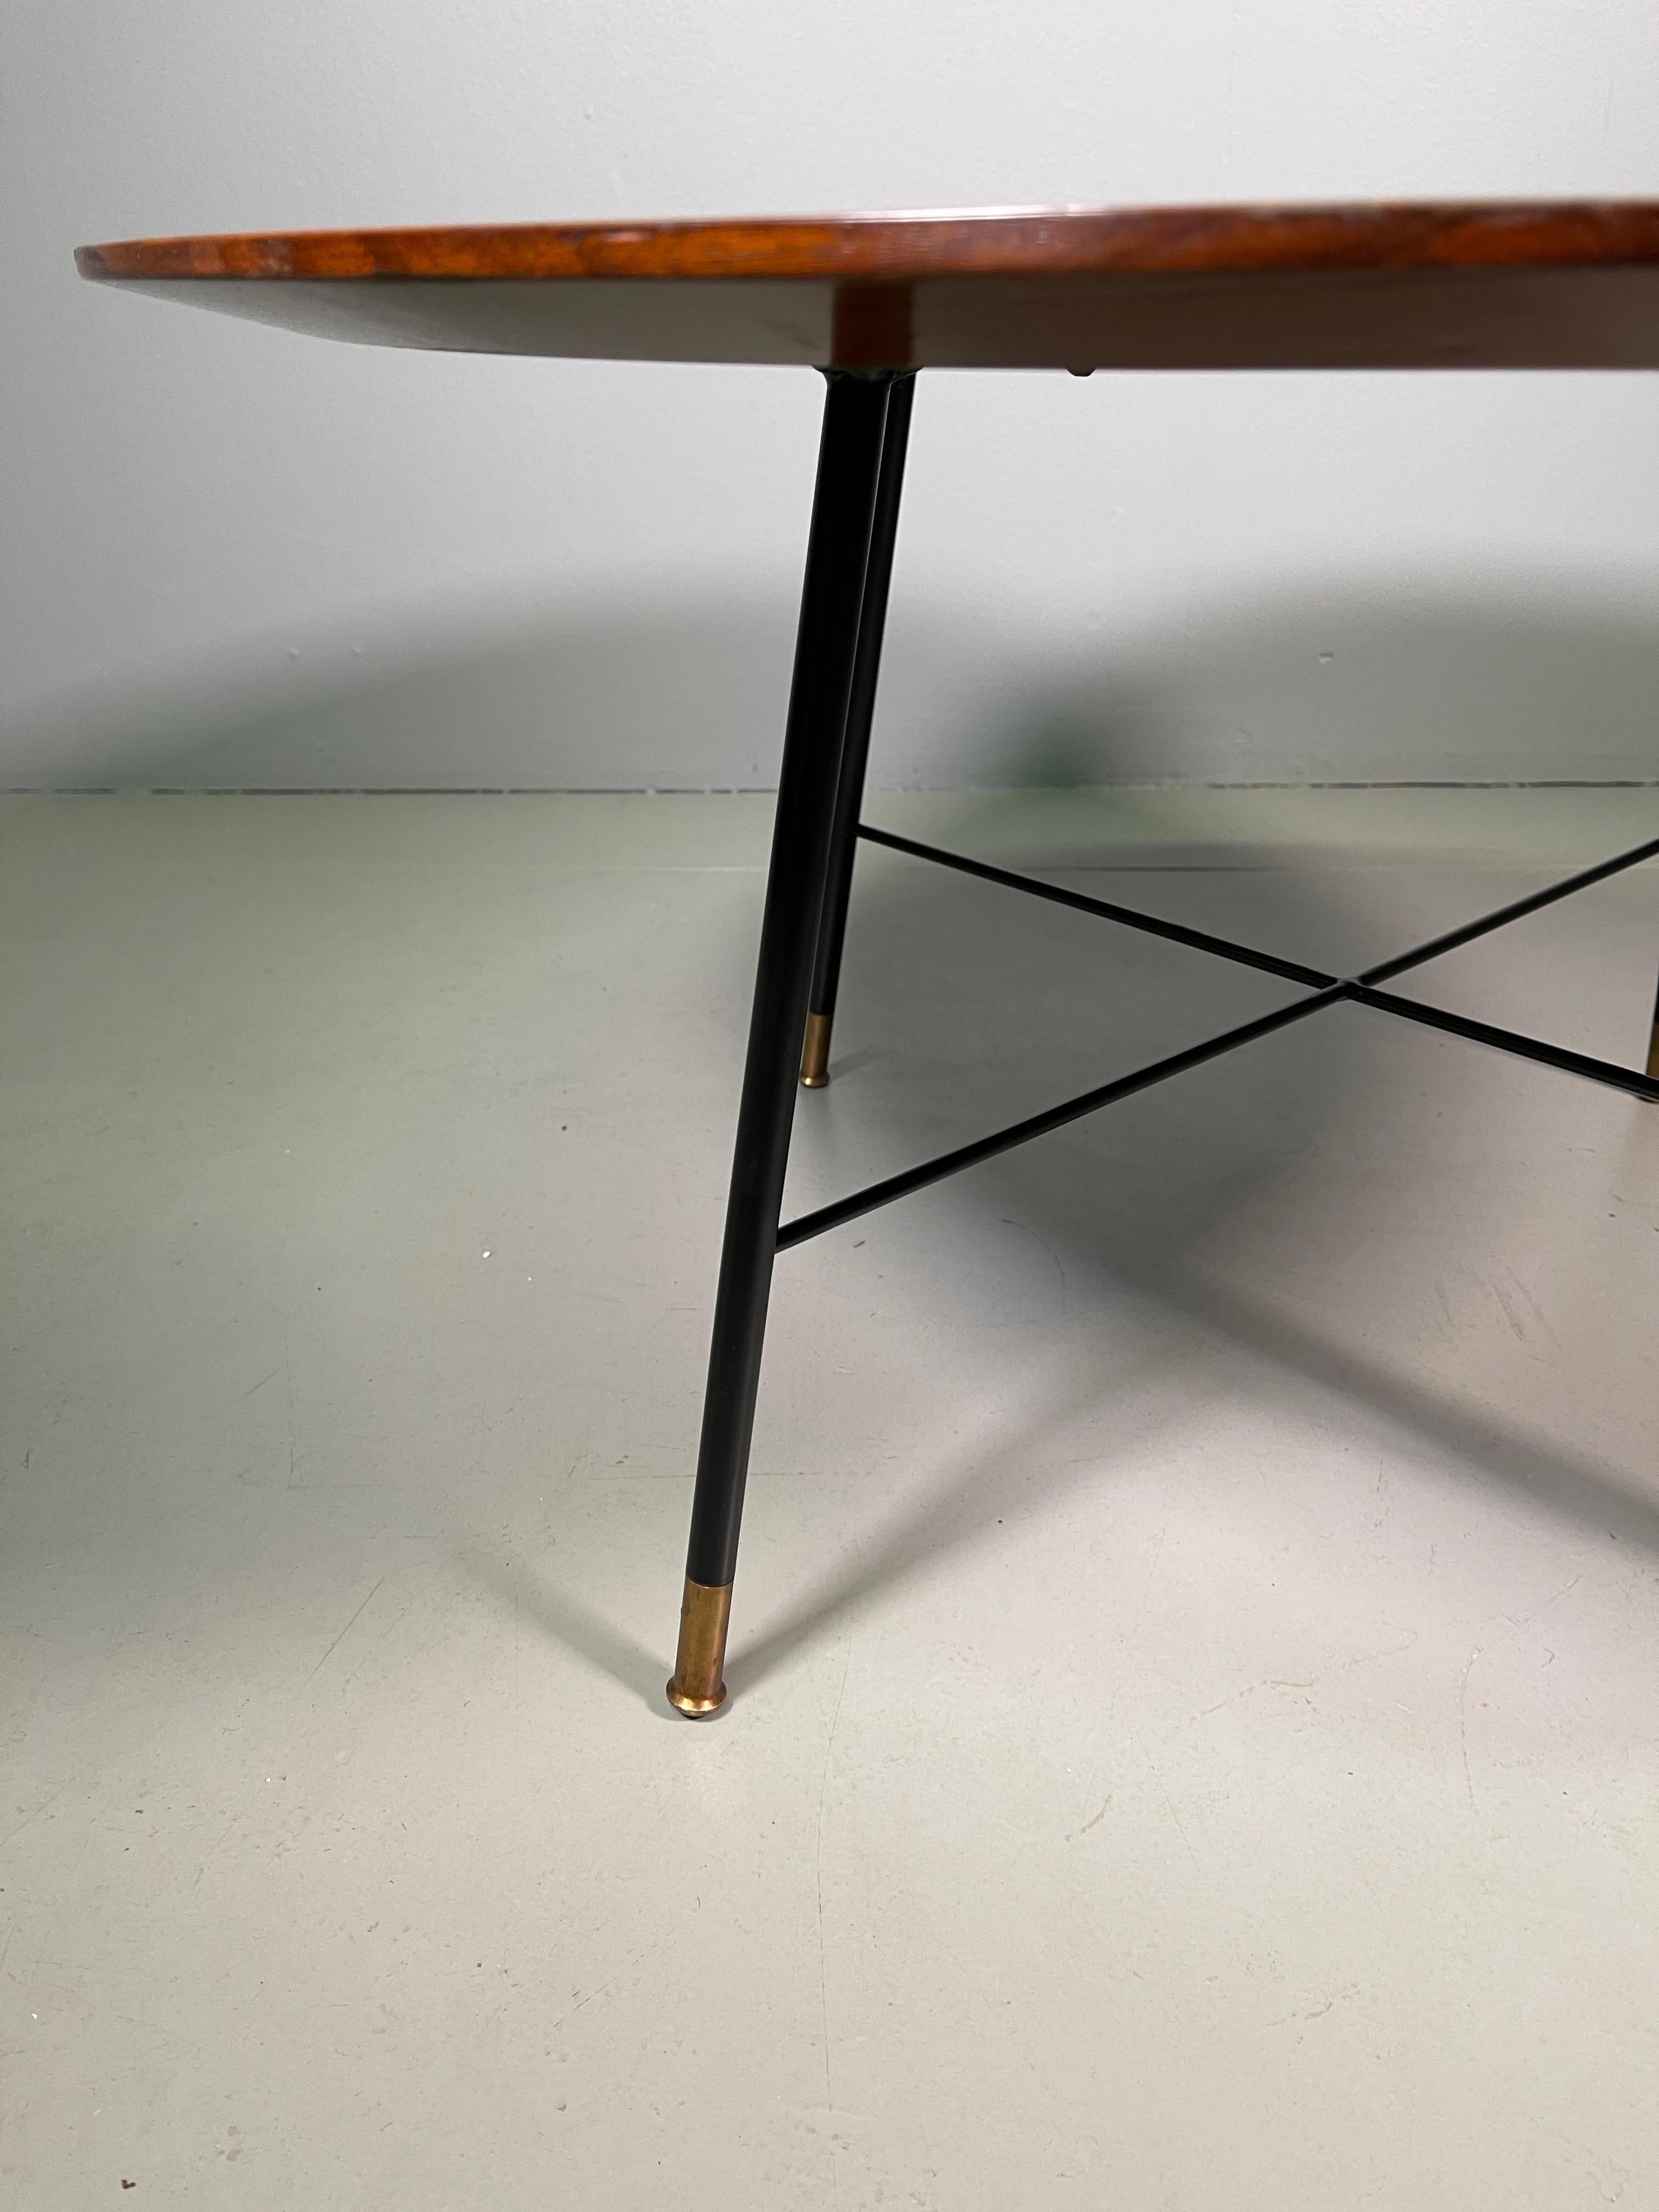 20th Century Ico Parisi Round Low Table with Mahogany Top and Brass Feet, Cassina Milano 1955